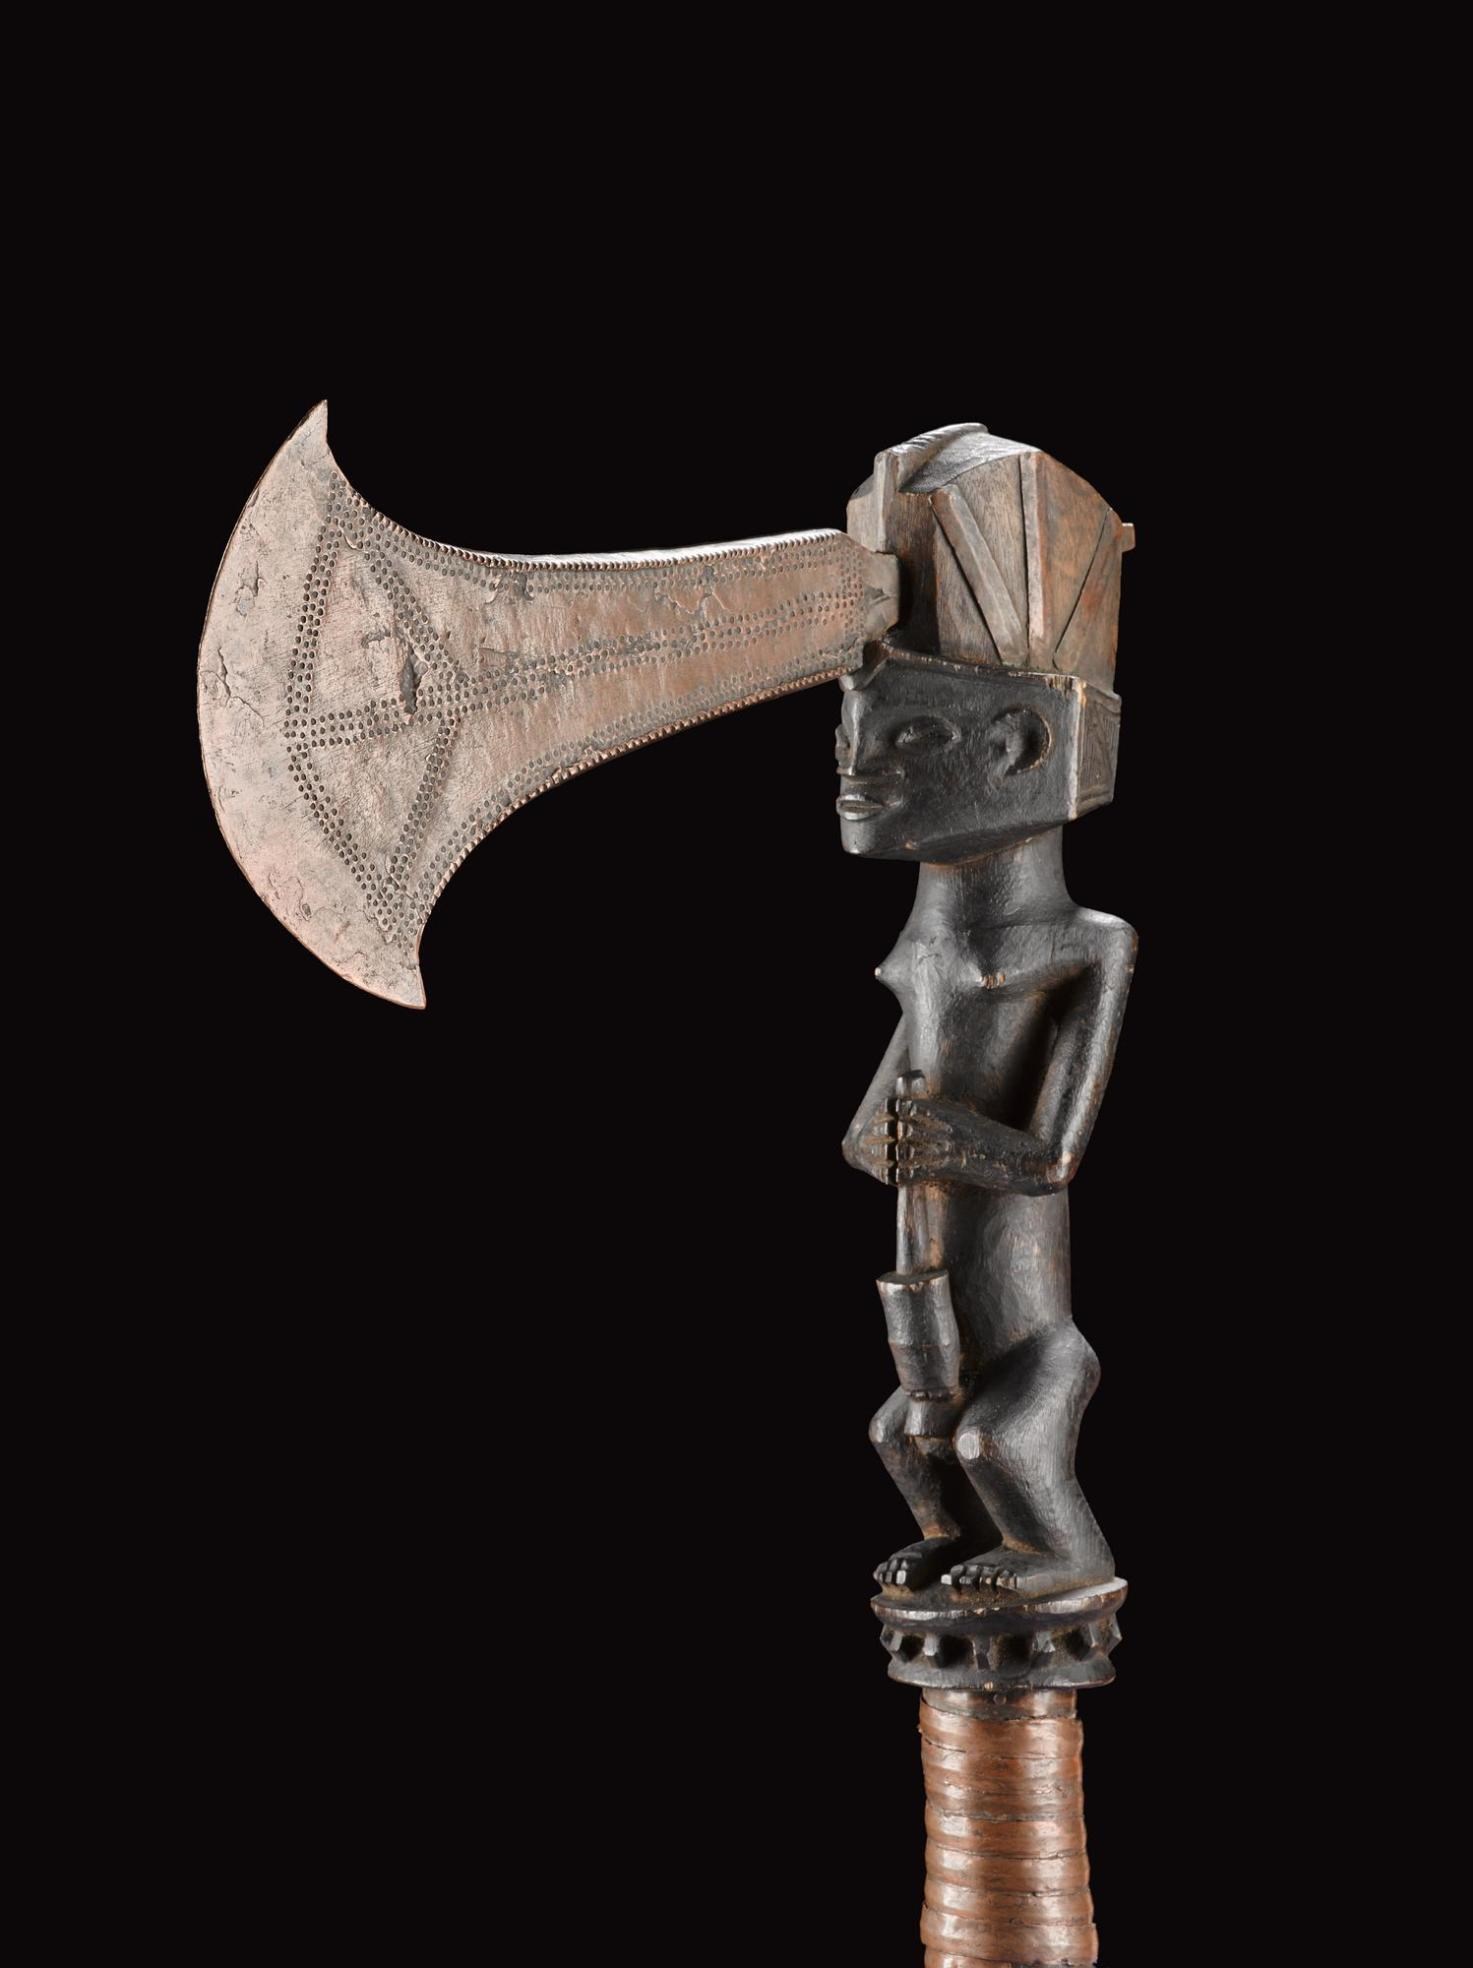 Ceremonial axe with copper blade, wooden shaft carved in the form of a woman pounding grain and grip bound in copper ribbon: Central Africa, Democratic Republic of the Congo, Katanga, late 19th century